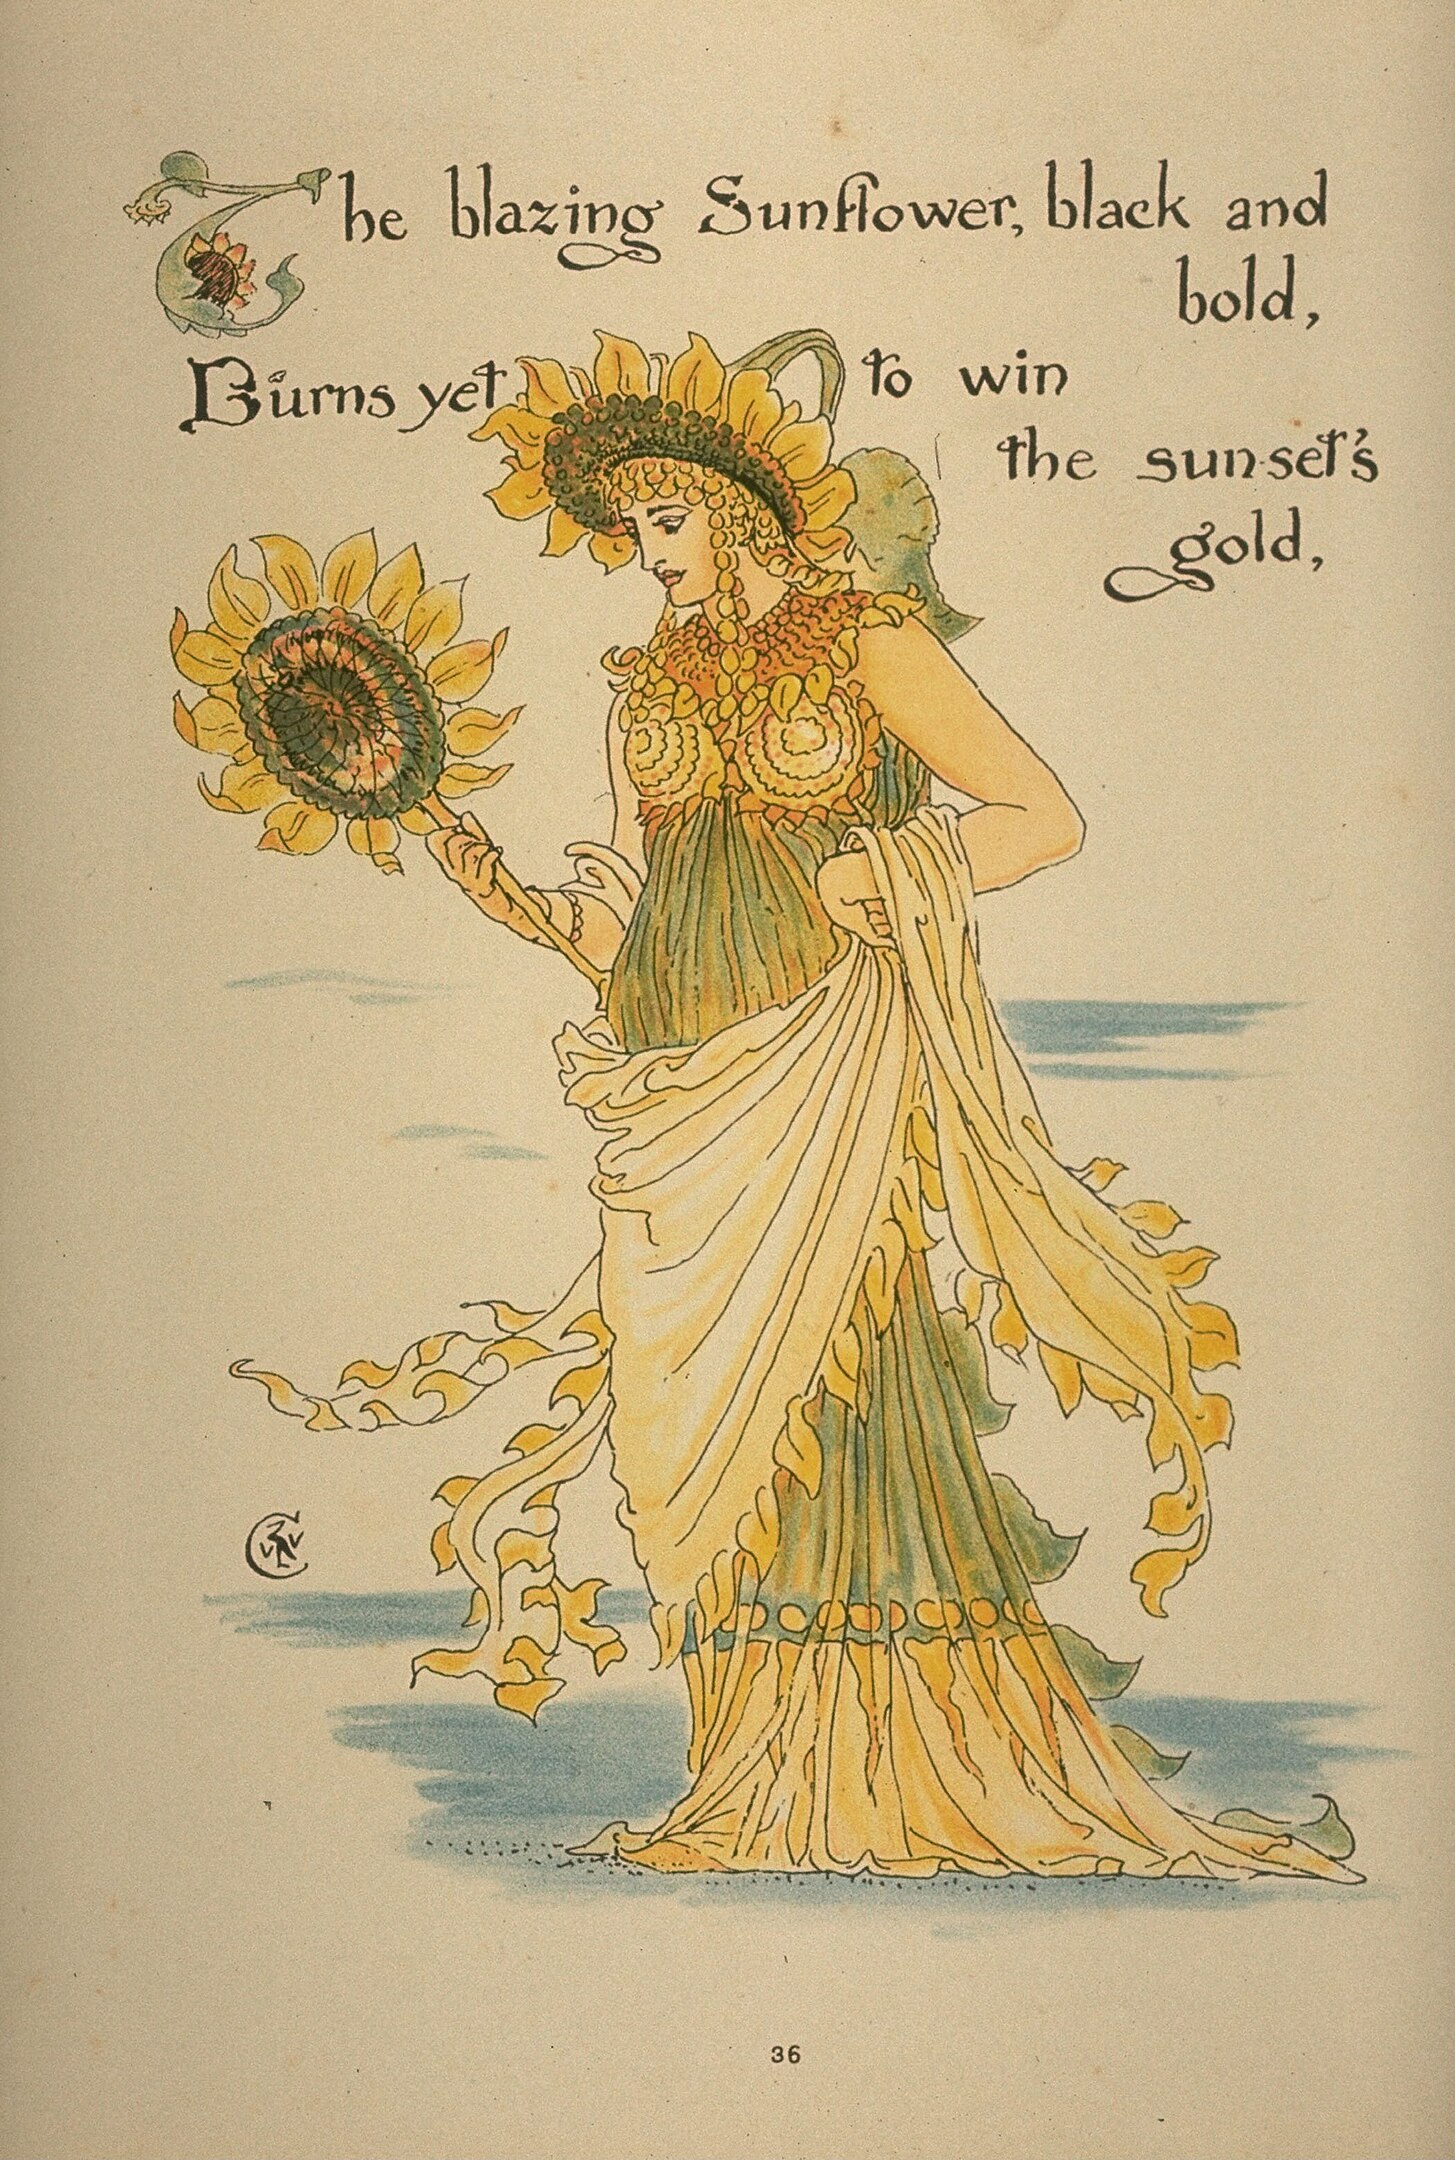 A woman dressed like a sunflower with the text "The blazing sunflower, black and bold, burns yet to win the sunset's gold," around her